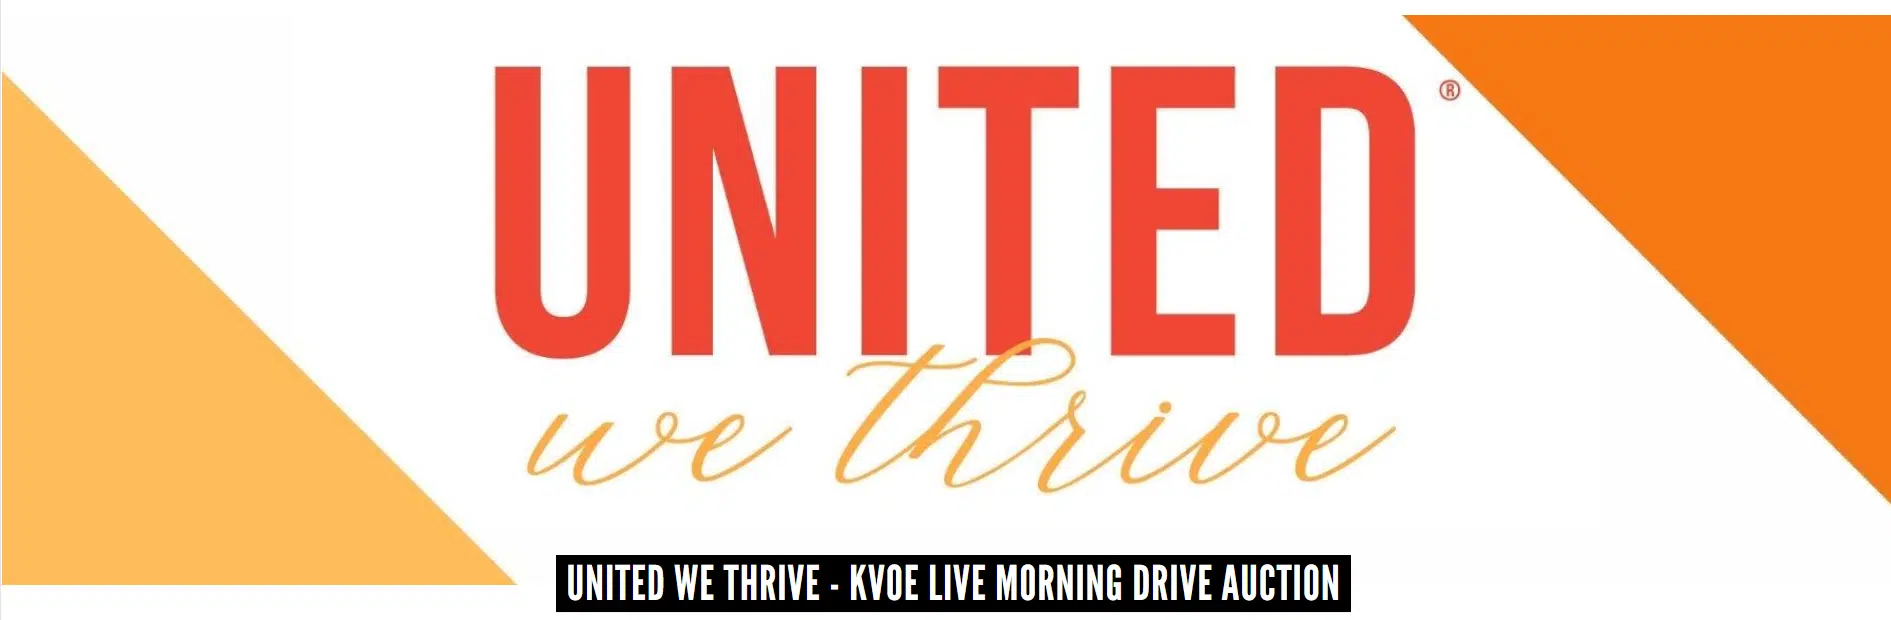 United We Thrive-KVOE Live Morning Drive Auction nets $5,400 for United Way's fundraising campaign